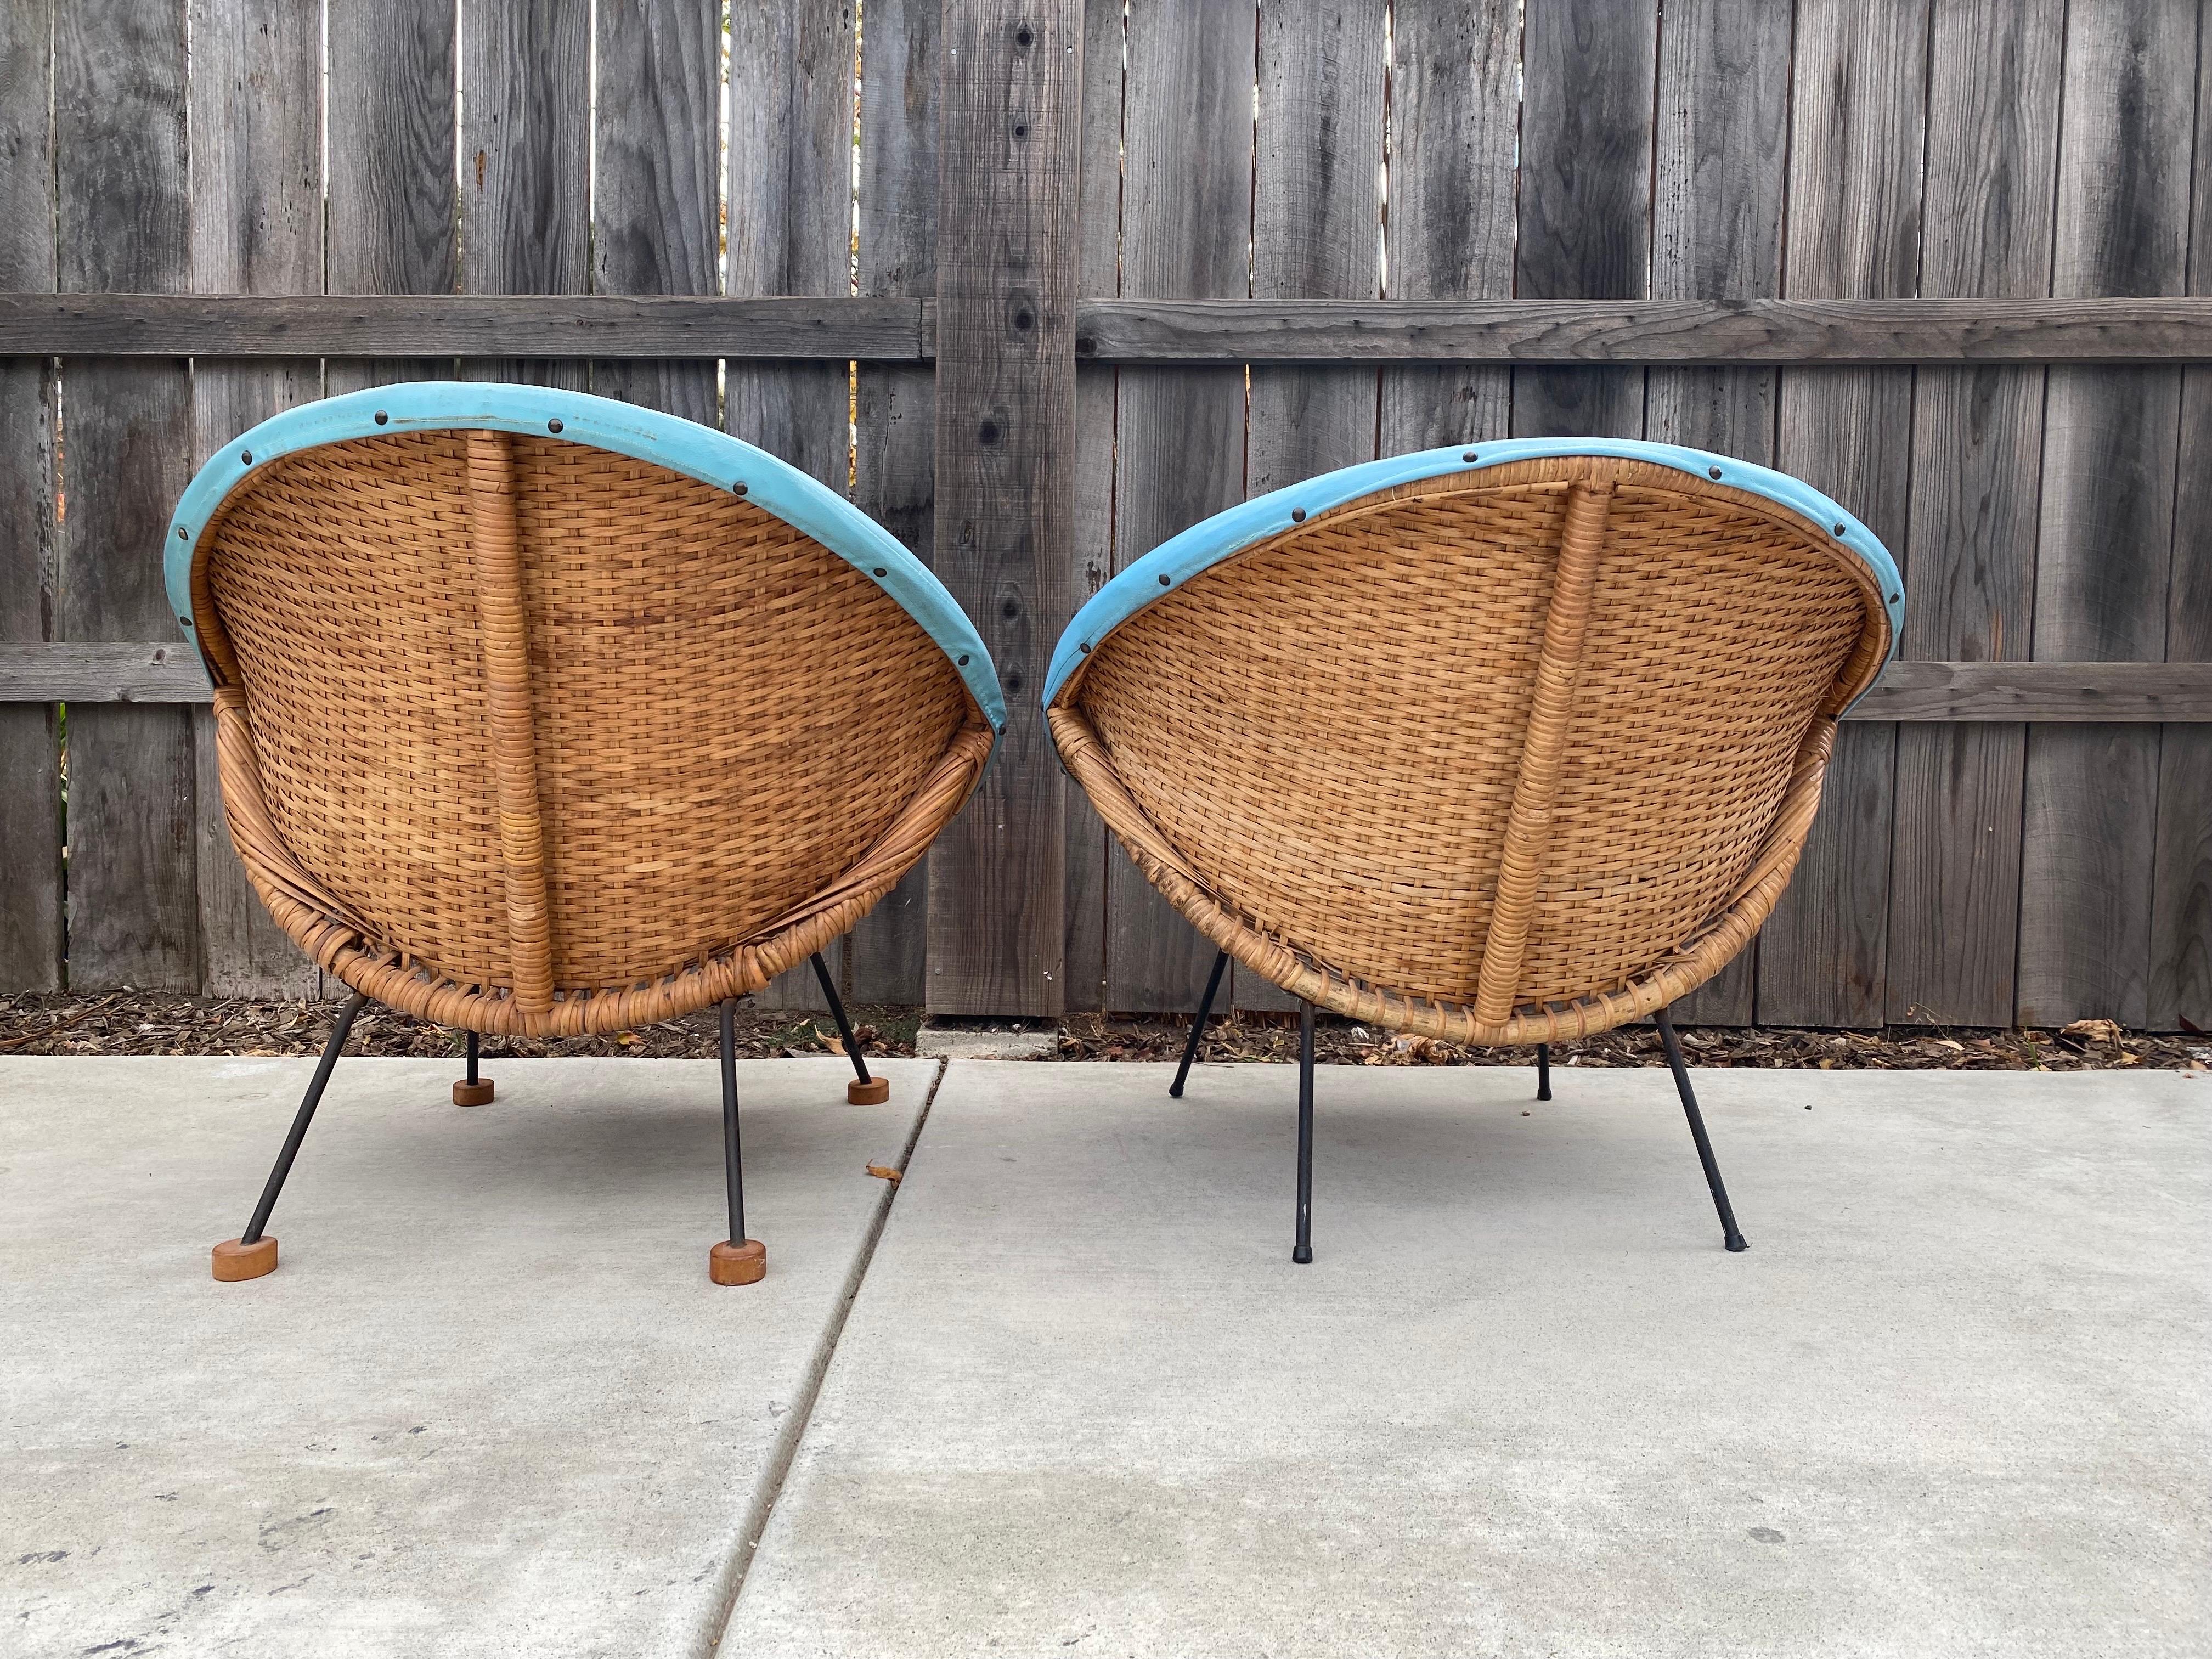 American Mid-Century Modern Boho Chic Turquoise Rattan Scoop Chairs, a Pair For Sale